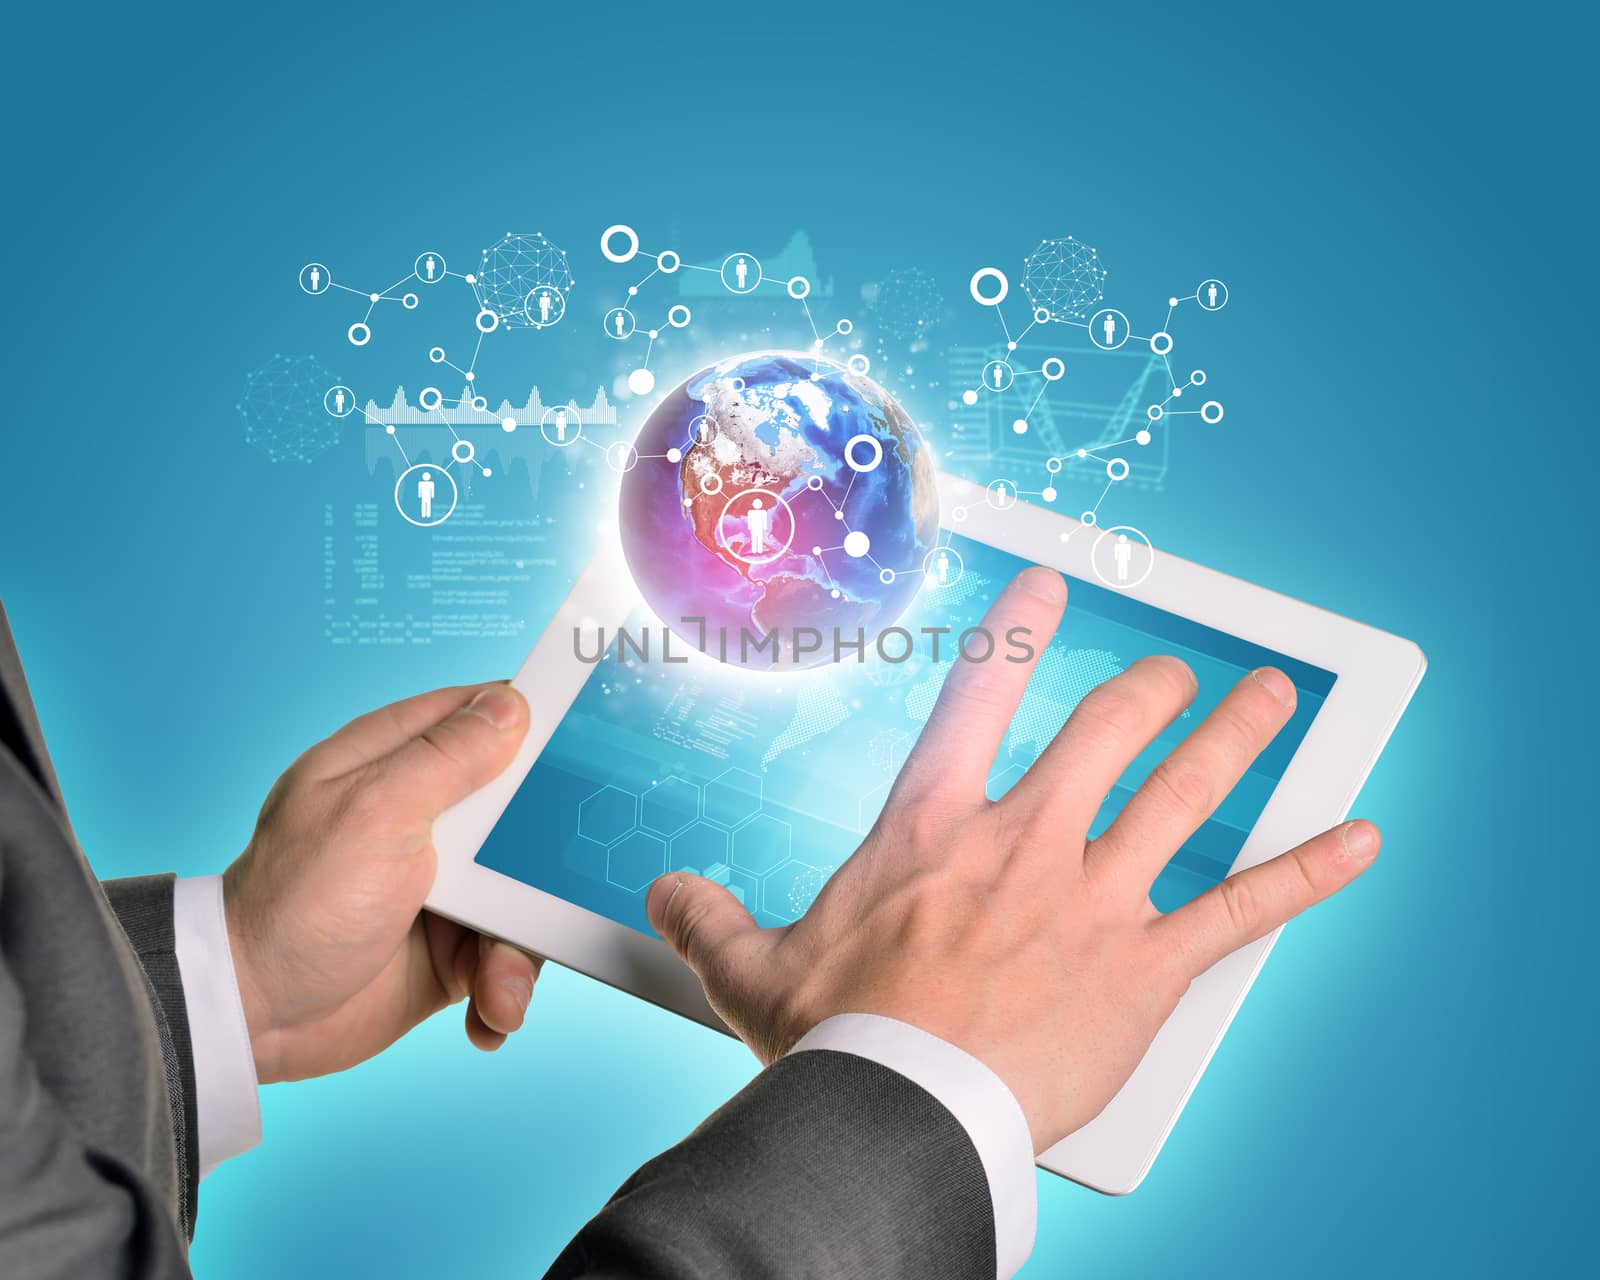 Man hands using tablet pc. Earth and network people icons near tablet. Element of this image furnished by NASA